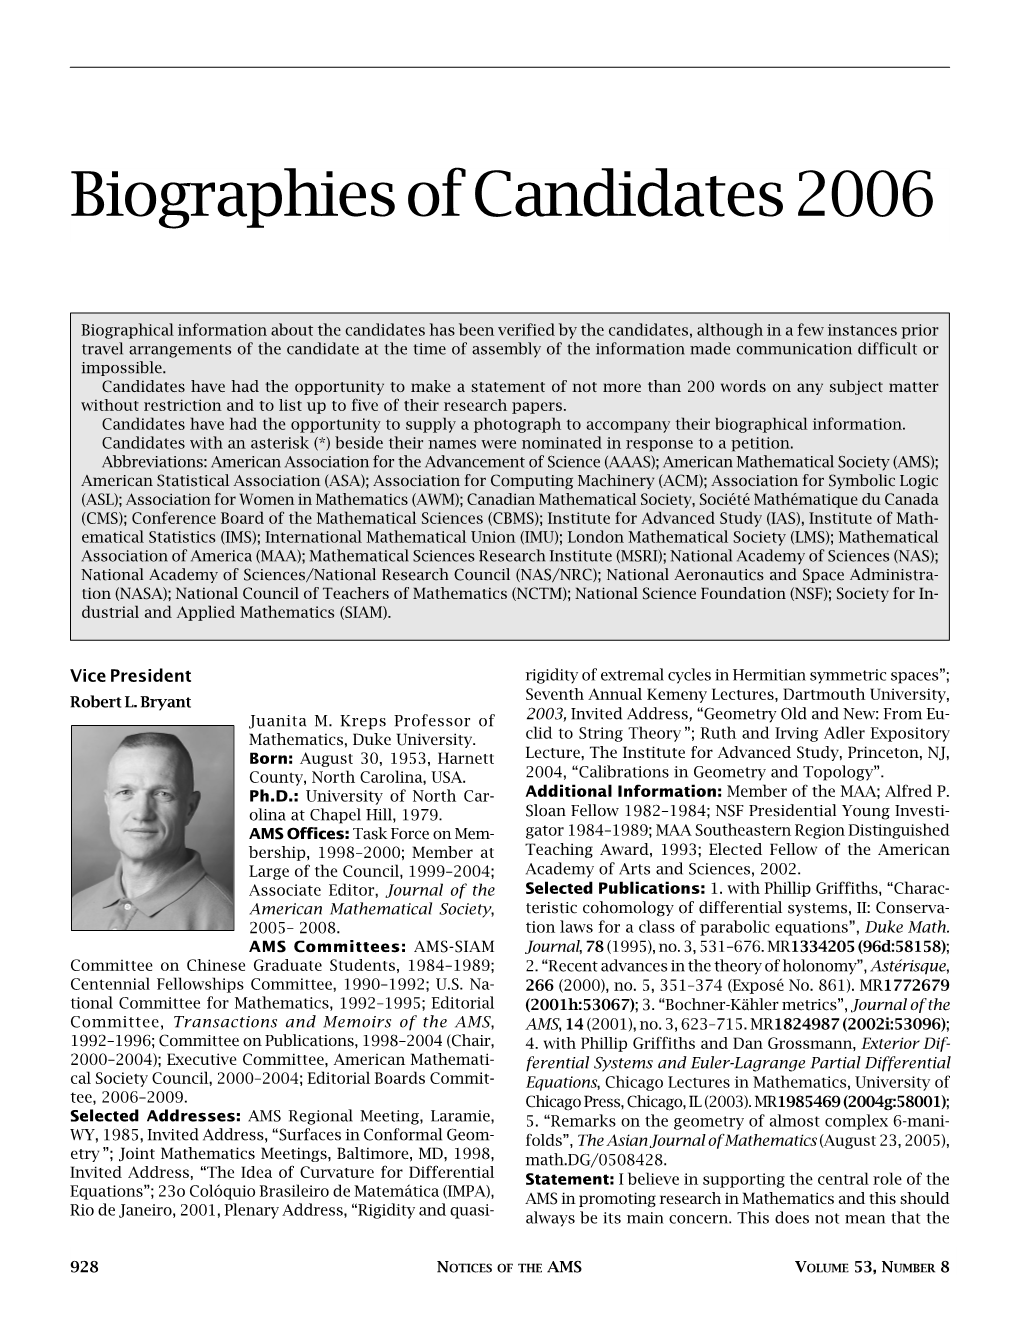 Biographies of Candidates 2006, Volume 53, Number 8